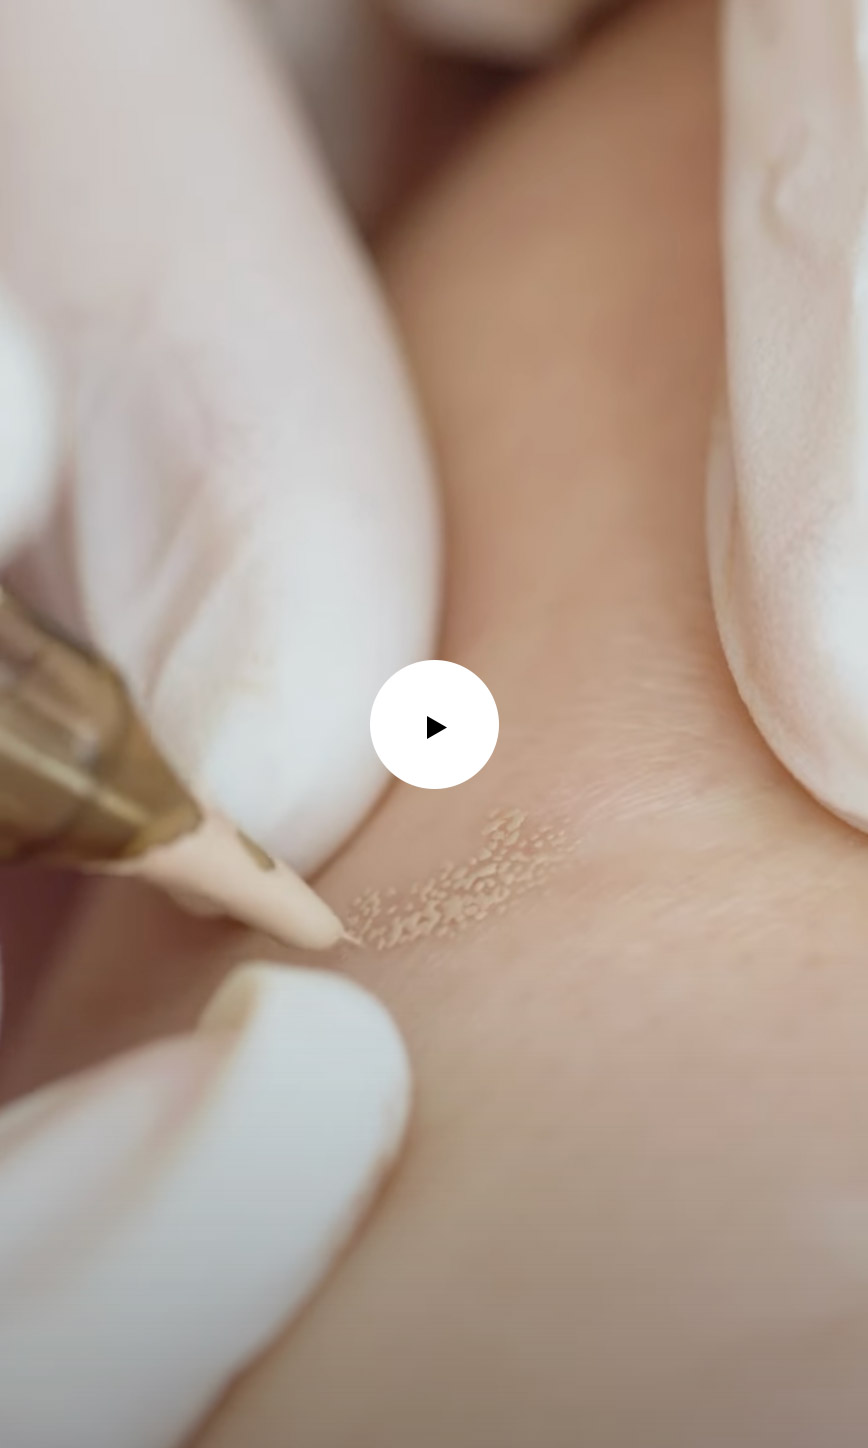 Inkless Scar & Stretch Marks Removal & Revision (ISR). Cosmetic and Mediical Tattoo by Dasha. Permanent makeup and reconstructive tattoo, scalp micro-pigmentation in Christchurch, New Zealand